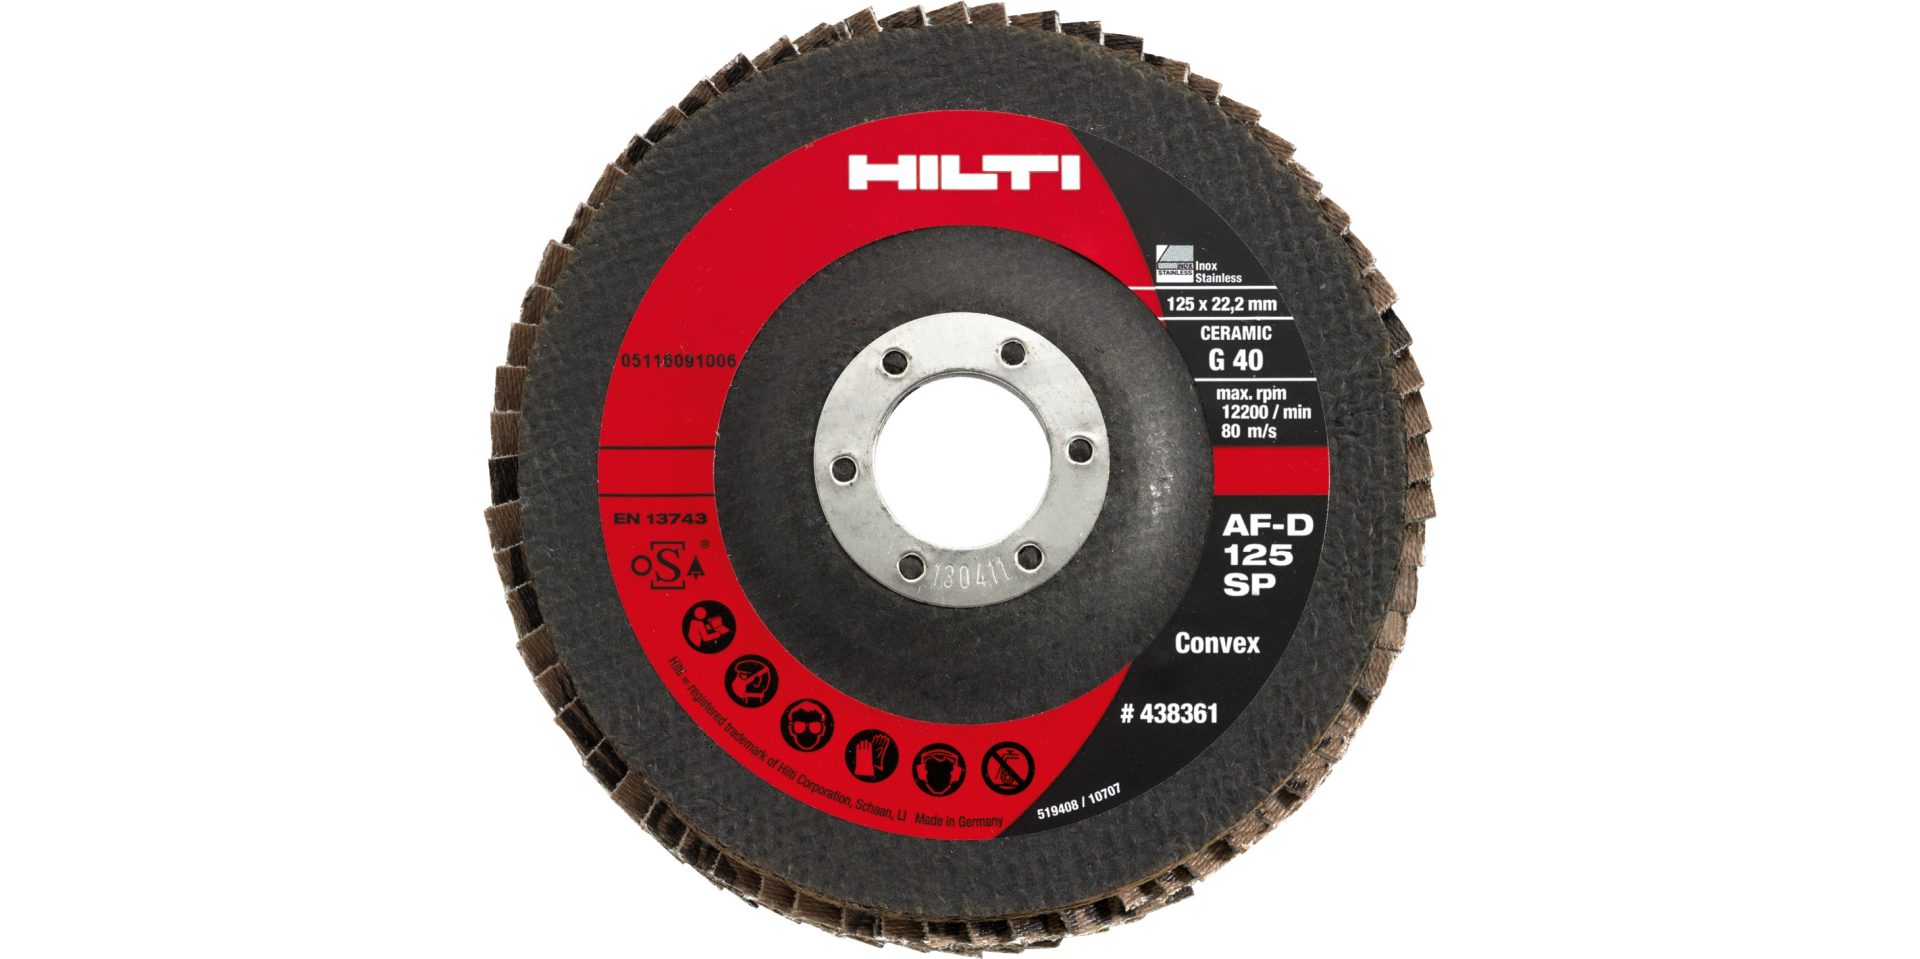 Ultimate flap disc with cooling coating for light grinding on stainless steel